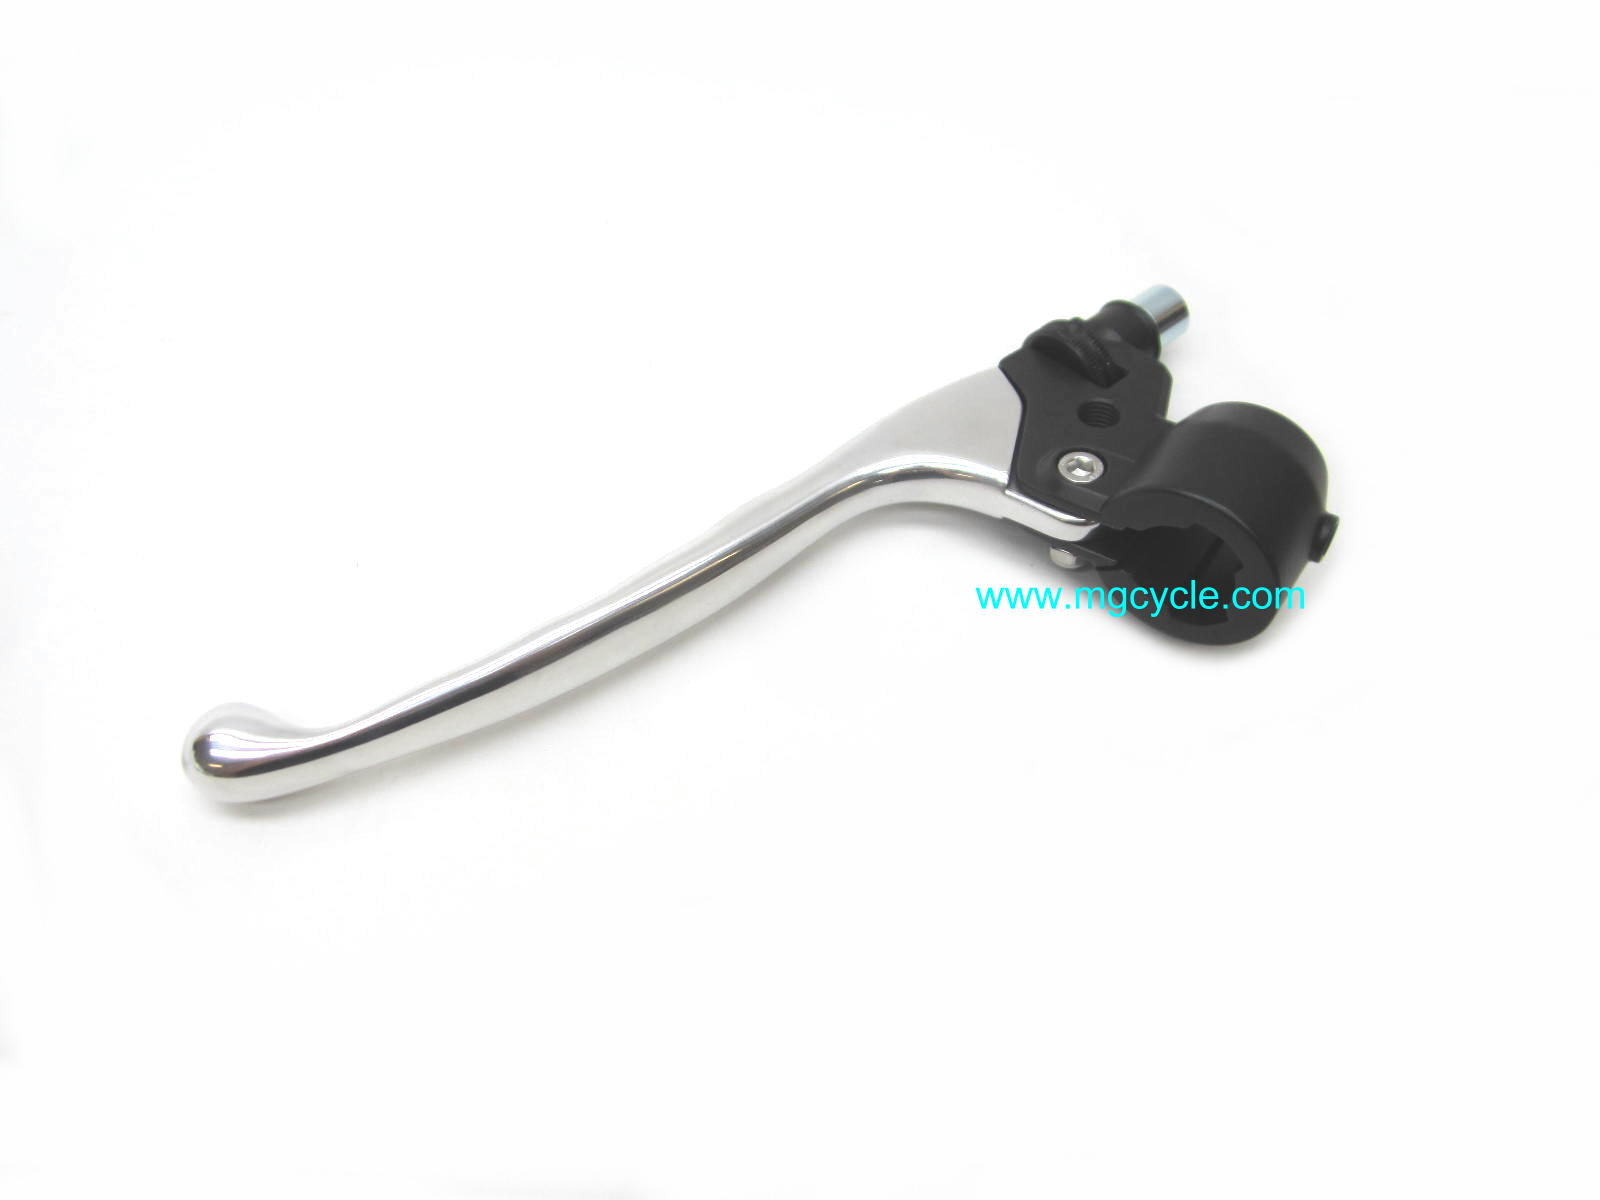 Polished clutch lever assembly T3 G5 Convert Cal2 SP GU17605570